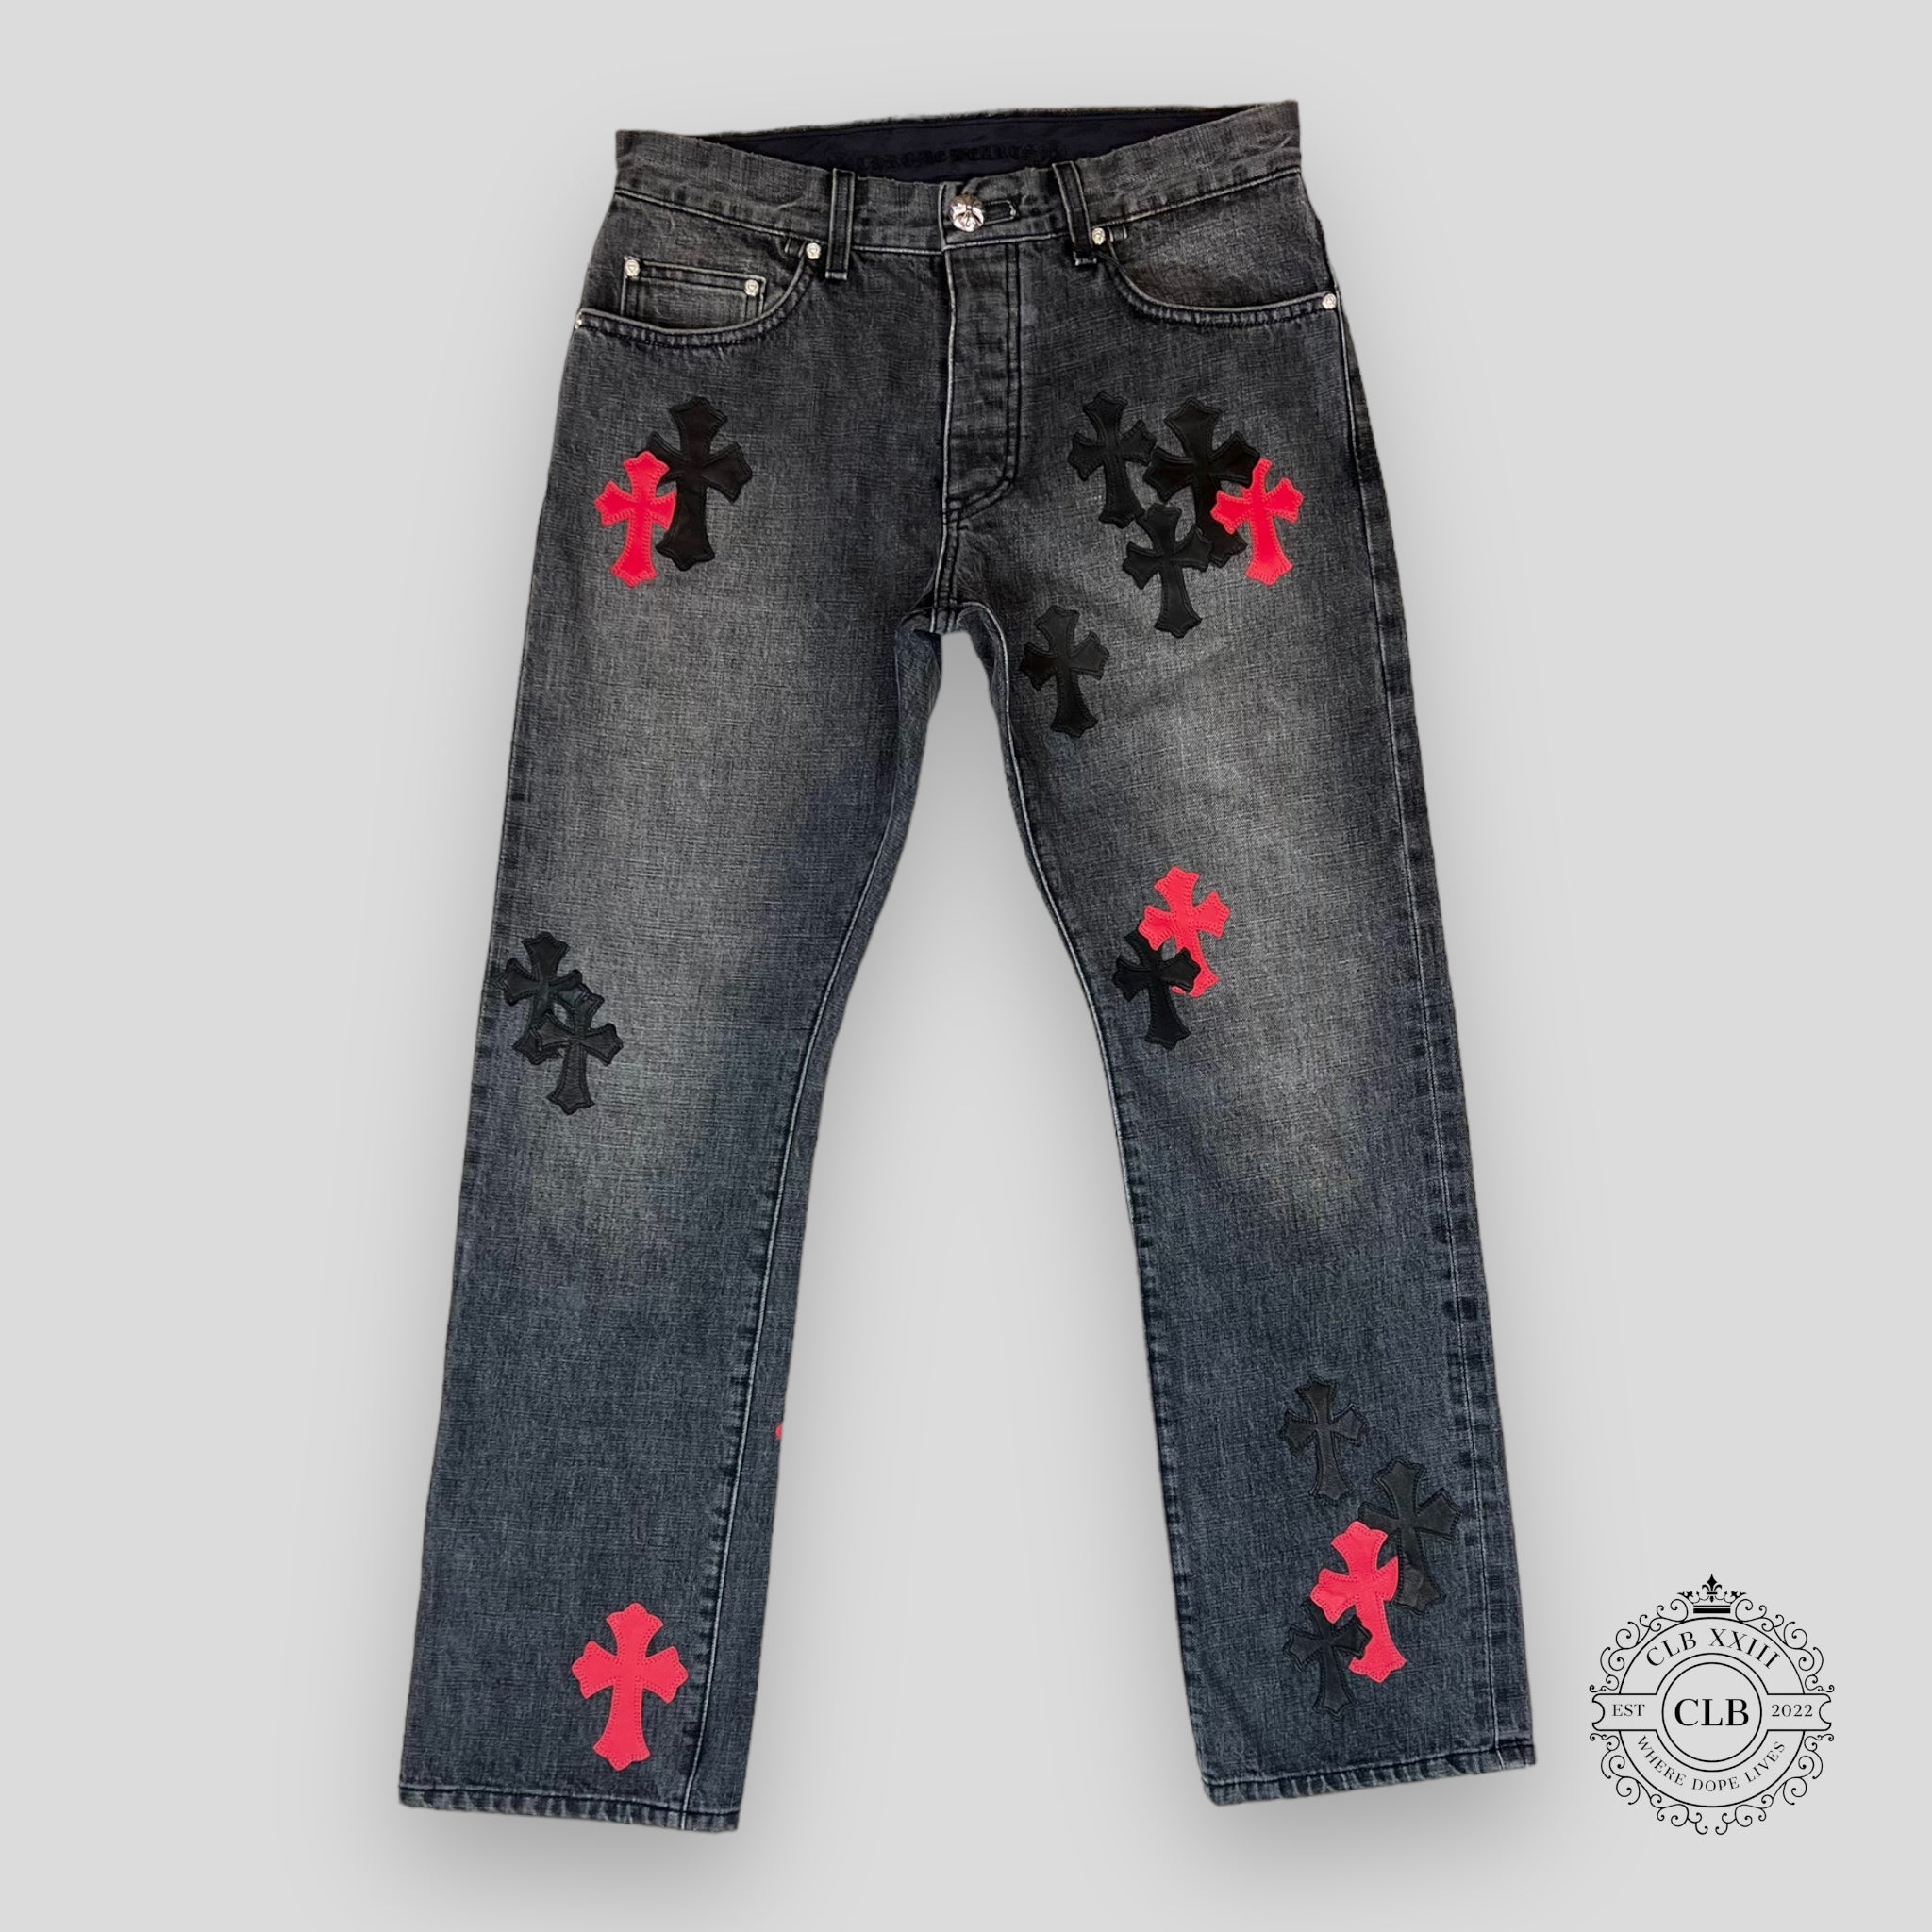 Chrome Hearts Cross Patch Jeans in Black/Red